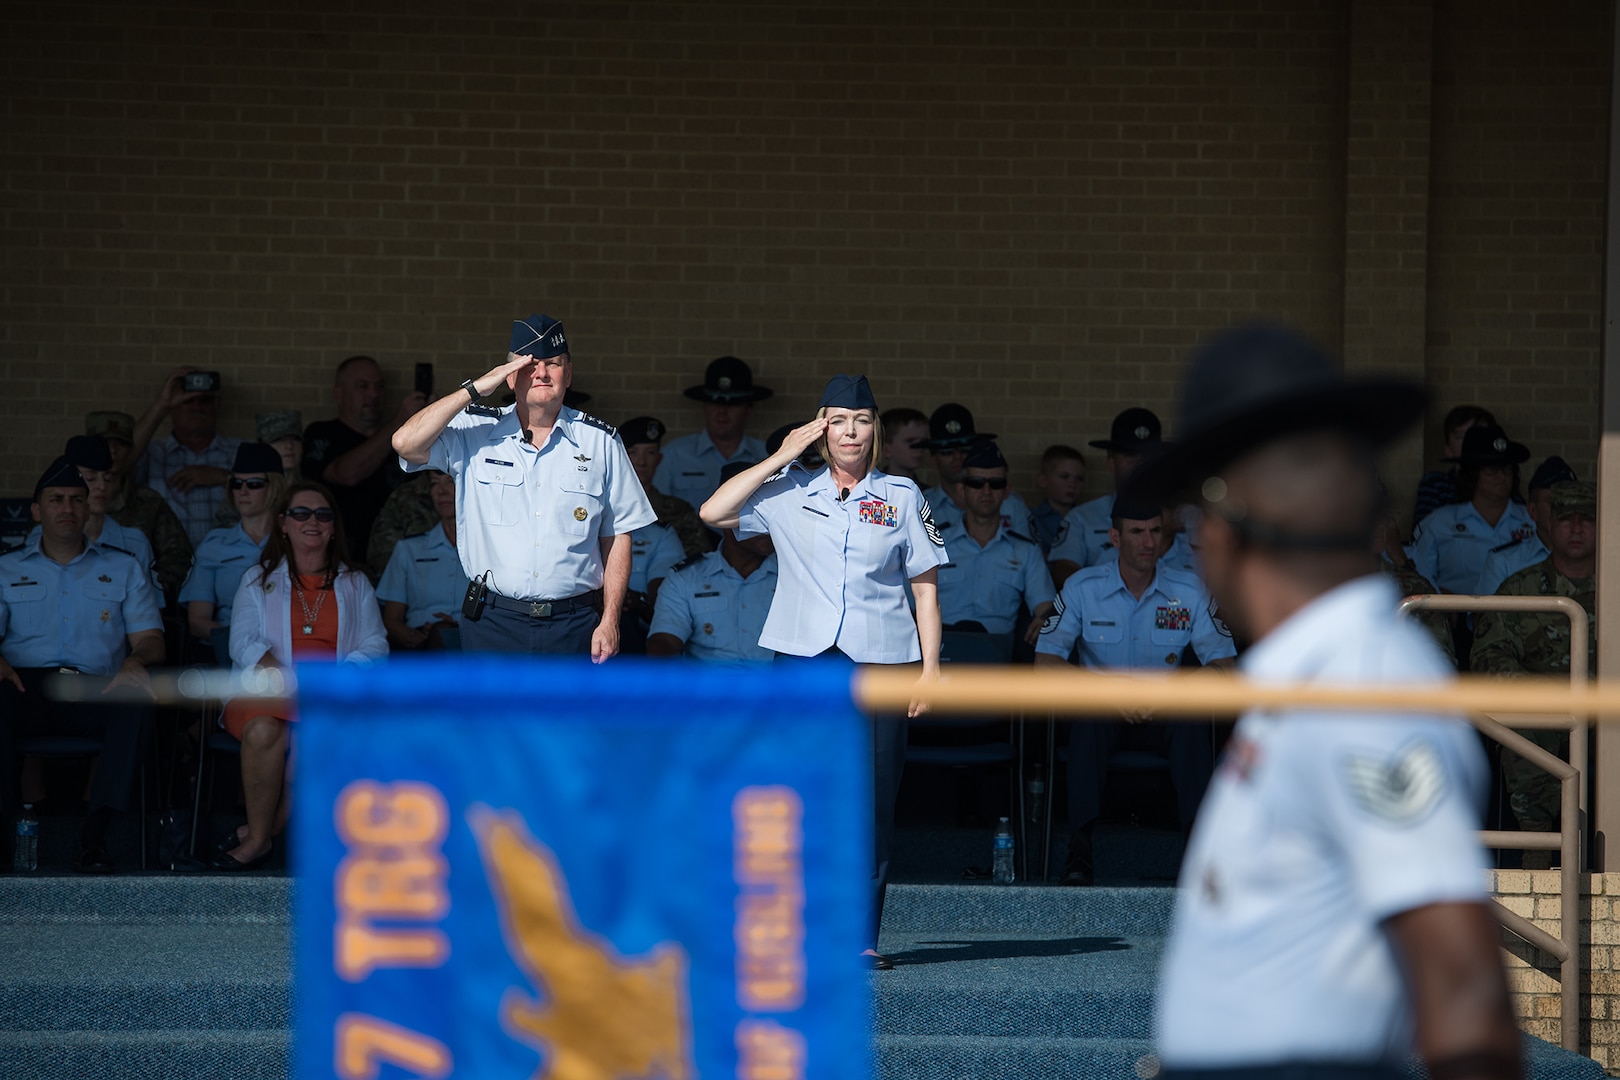 U.S. Air Force Lt. Gen. Brad Webb (right), commander of Air Education and Training Command (AETC), and Chief Master Sgt. Julie Gudgel, AETC command chief, salute basic military trainees during the graduation parade Aug. 2, 2019, at Joint Base San Antonio-Lackland, Texas